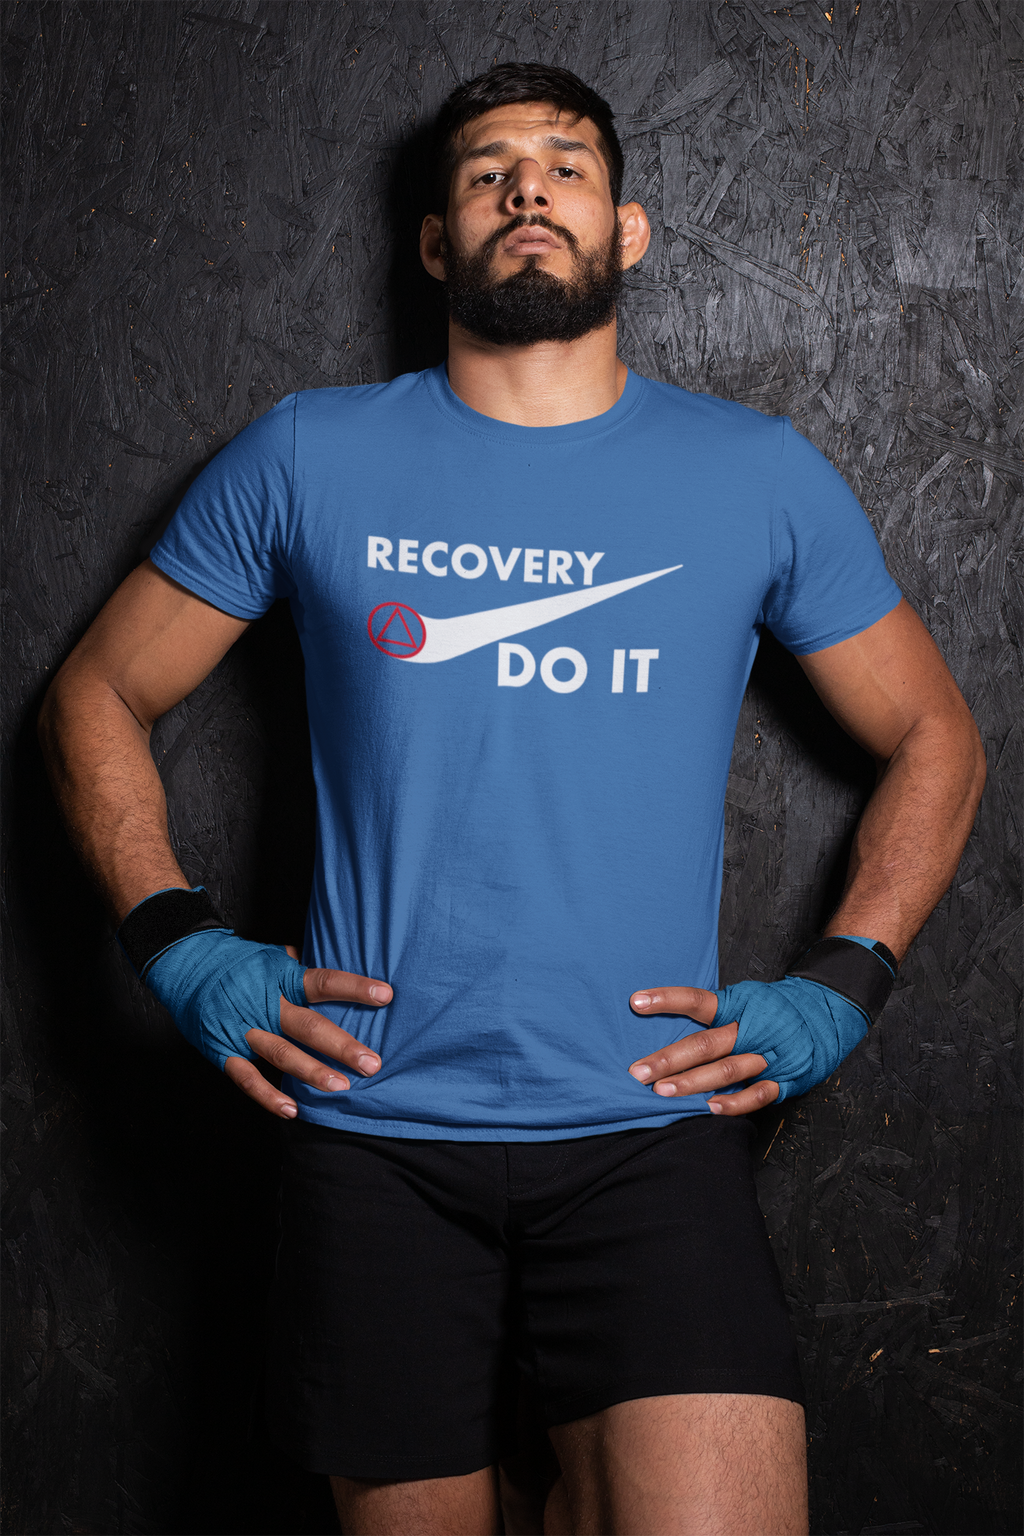 Recovery T Shirts, Recovery Hoodies and Recovery Accessories